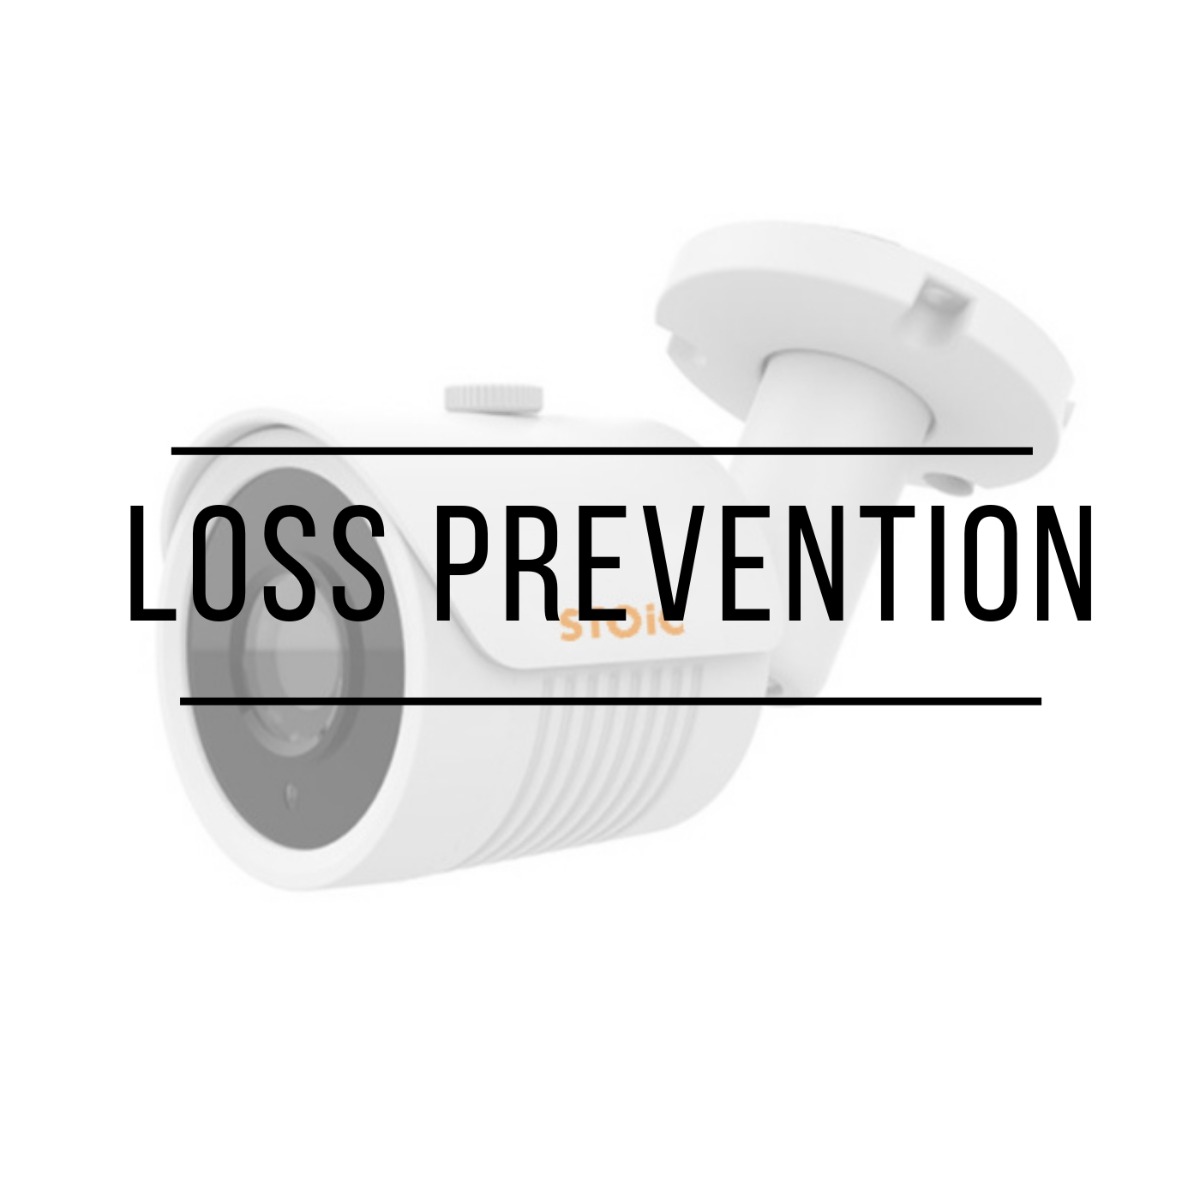 Loss Prevention helps keep your store safe and secure in Hawaii.